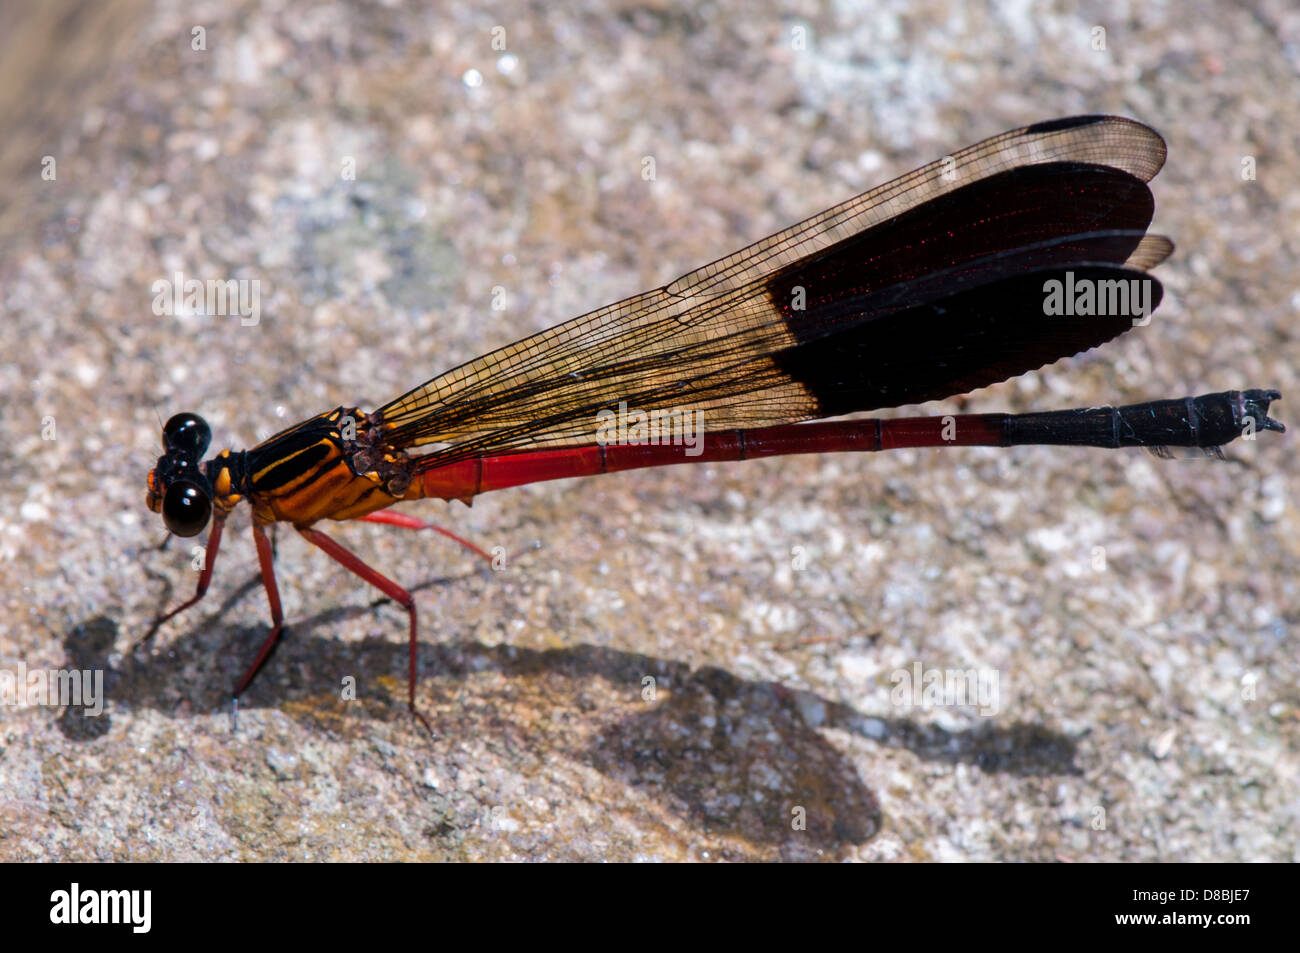 Adult red damselfly, side view Stock Photo